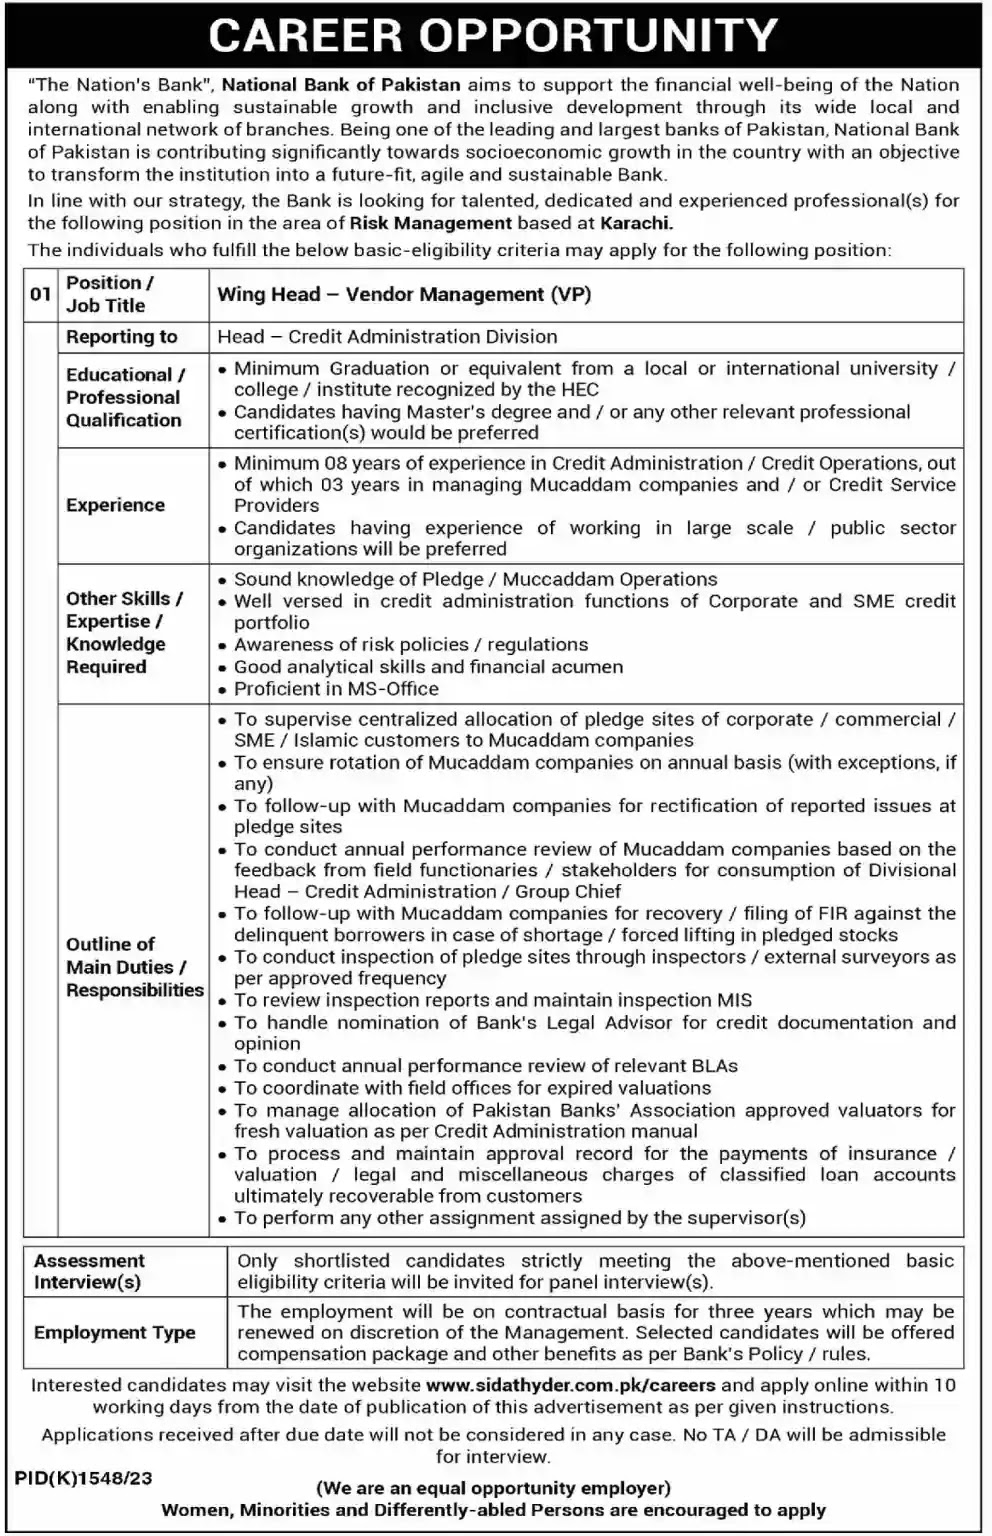 National Bank of Pakistan Career Opportunity